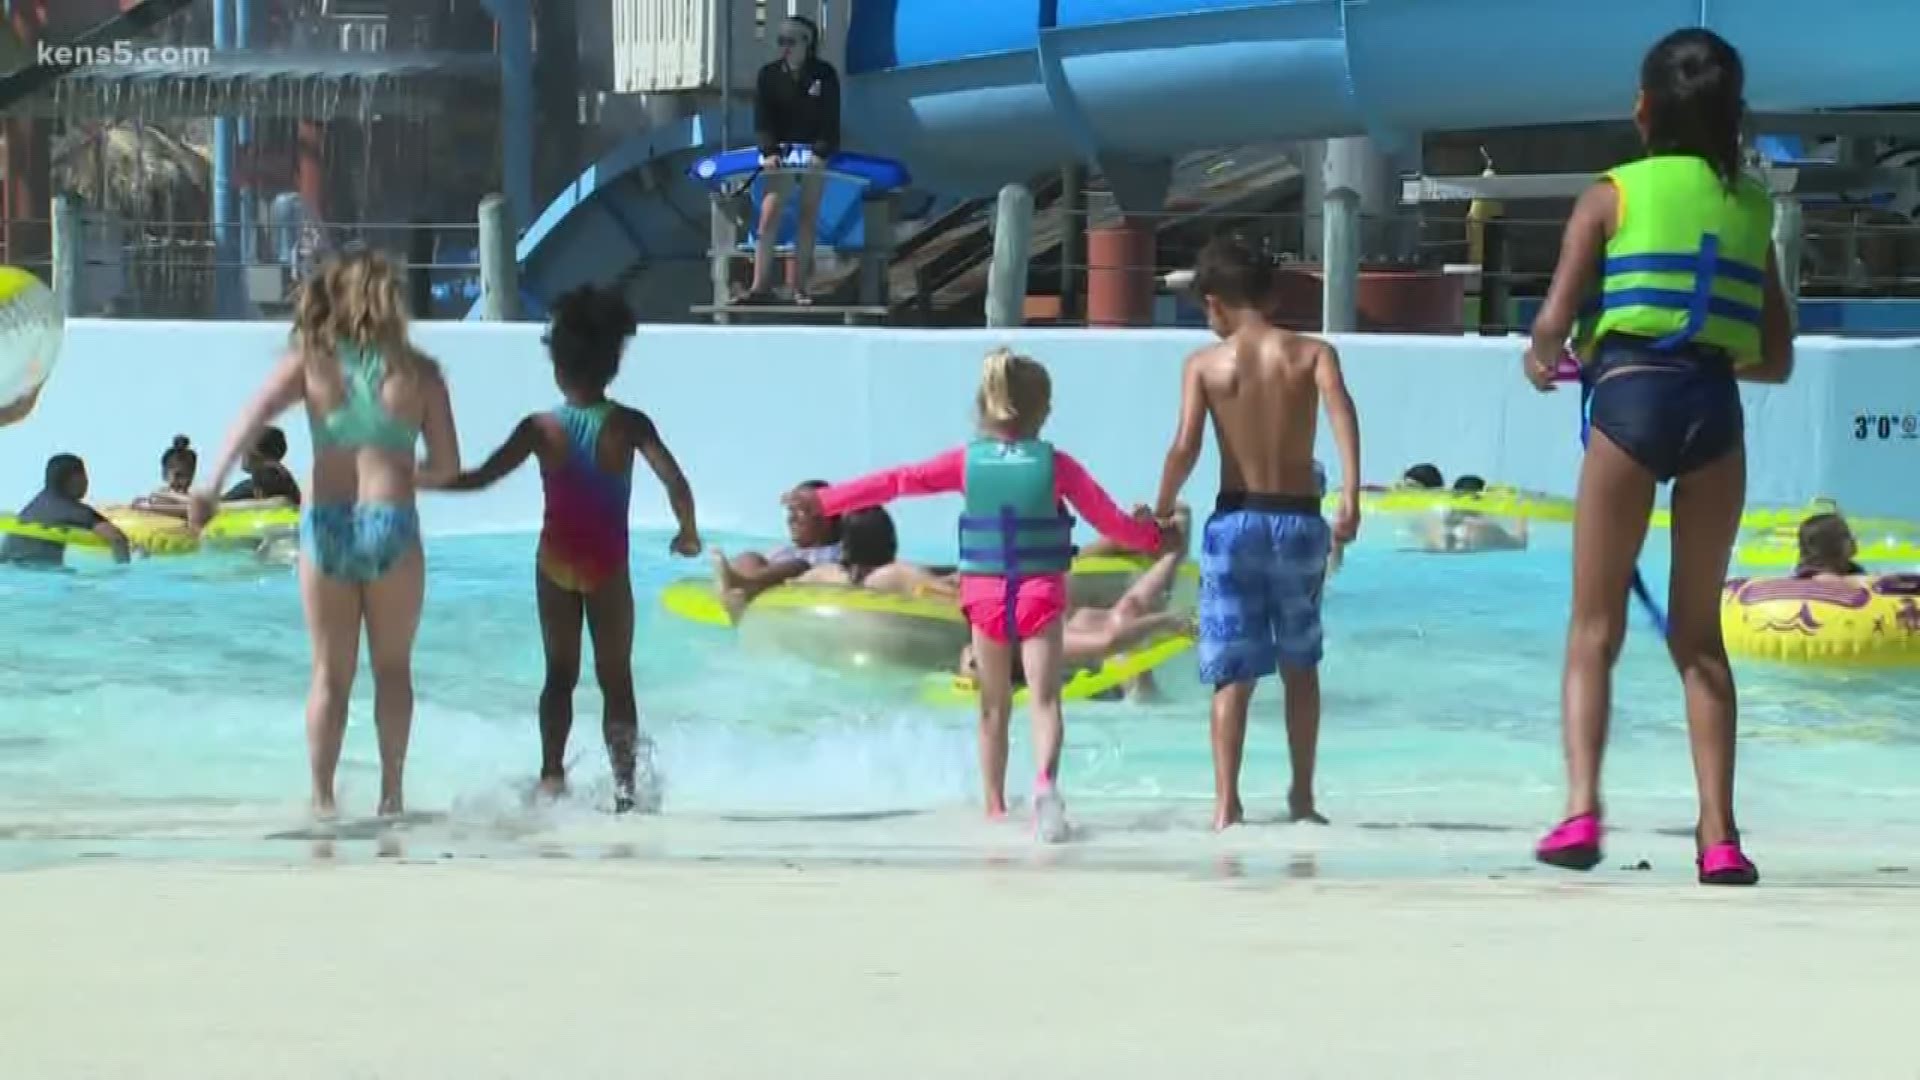 As we get deeper into spring and the weather heats up, the iconic New Braunfels water park decided to have local families and foster kids have a day for themselves